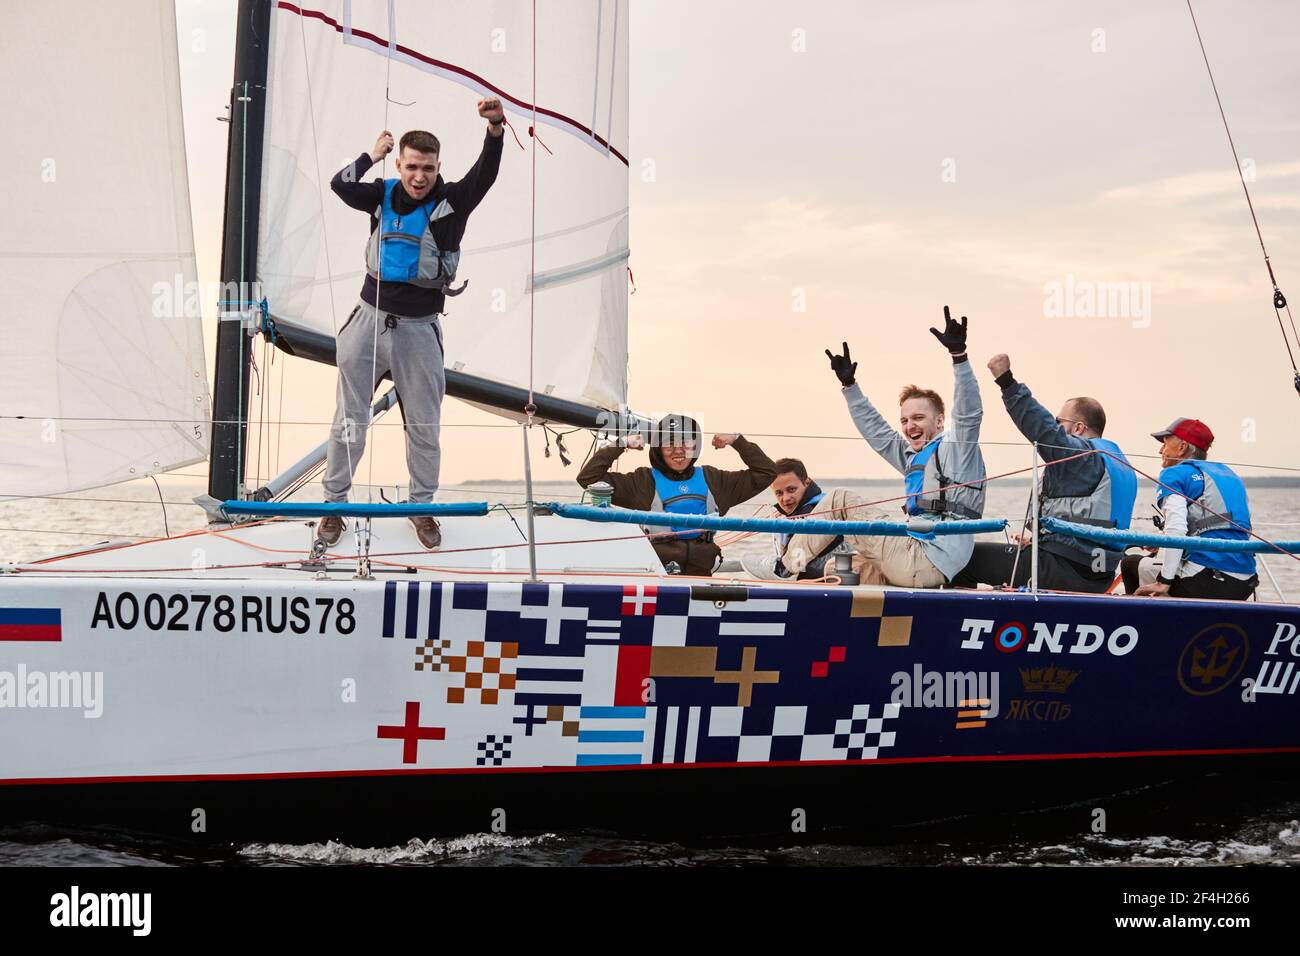 Russia, St.Petersburg, 05 September 2020: The team celebrates a victory in race, a sailing regatta on the sailboat, pull ropes, water splashes in the Stock Photo